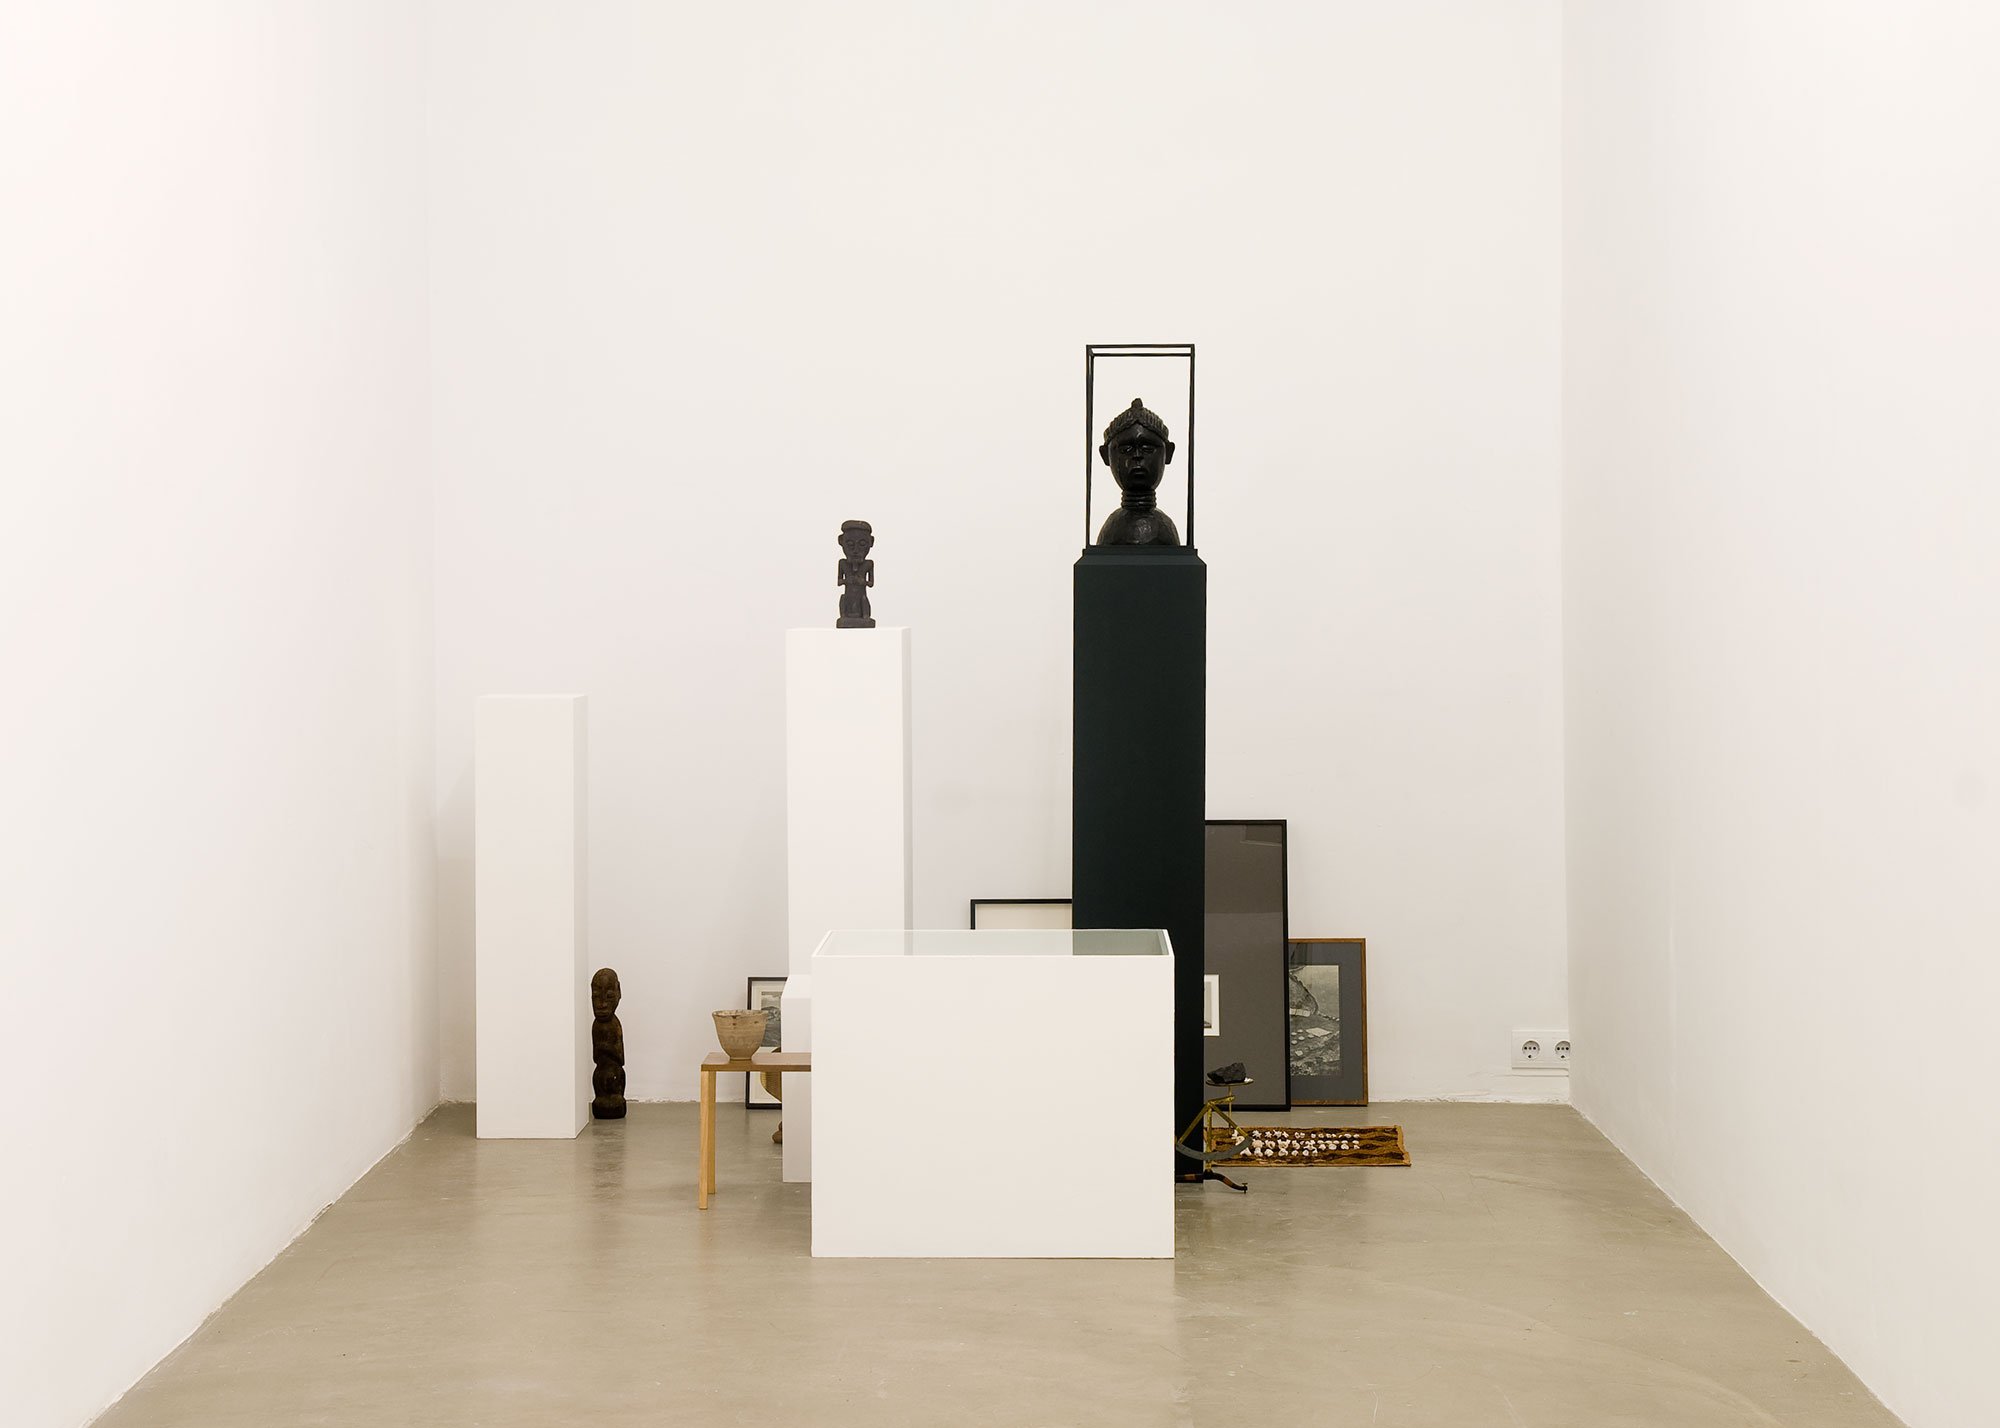 Haris Epaminonda, installation with three plinths, three African statuettes, a carpet with bones (49 pieces), a wooden statue of a cobra snake, an urn, a scale, nine frames on the floor and a vitrine that contains a Chinese book and an old stamp. Installation view, VOL. IV, Rodeo, Istanbul, 2009